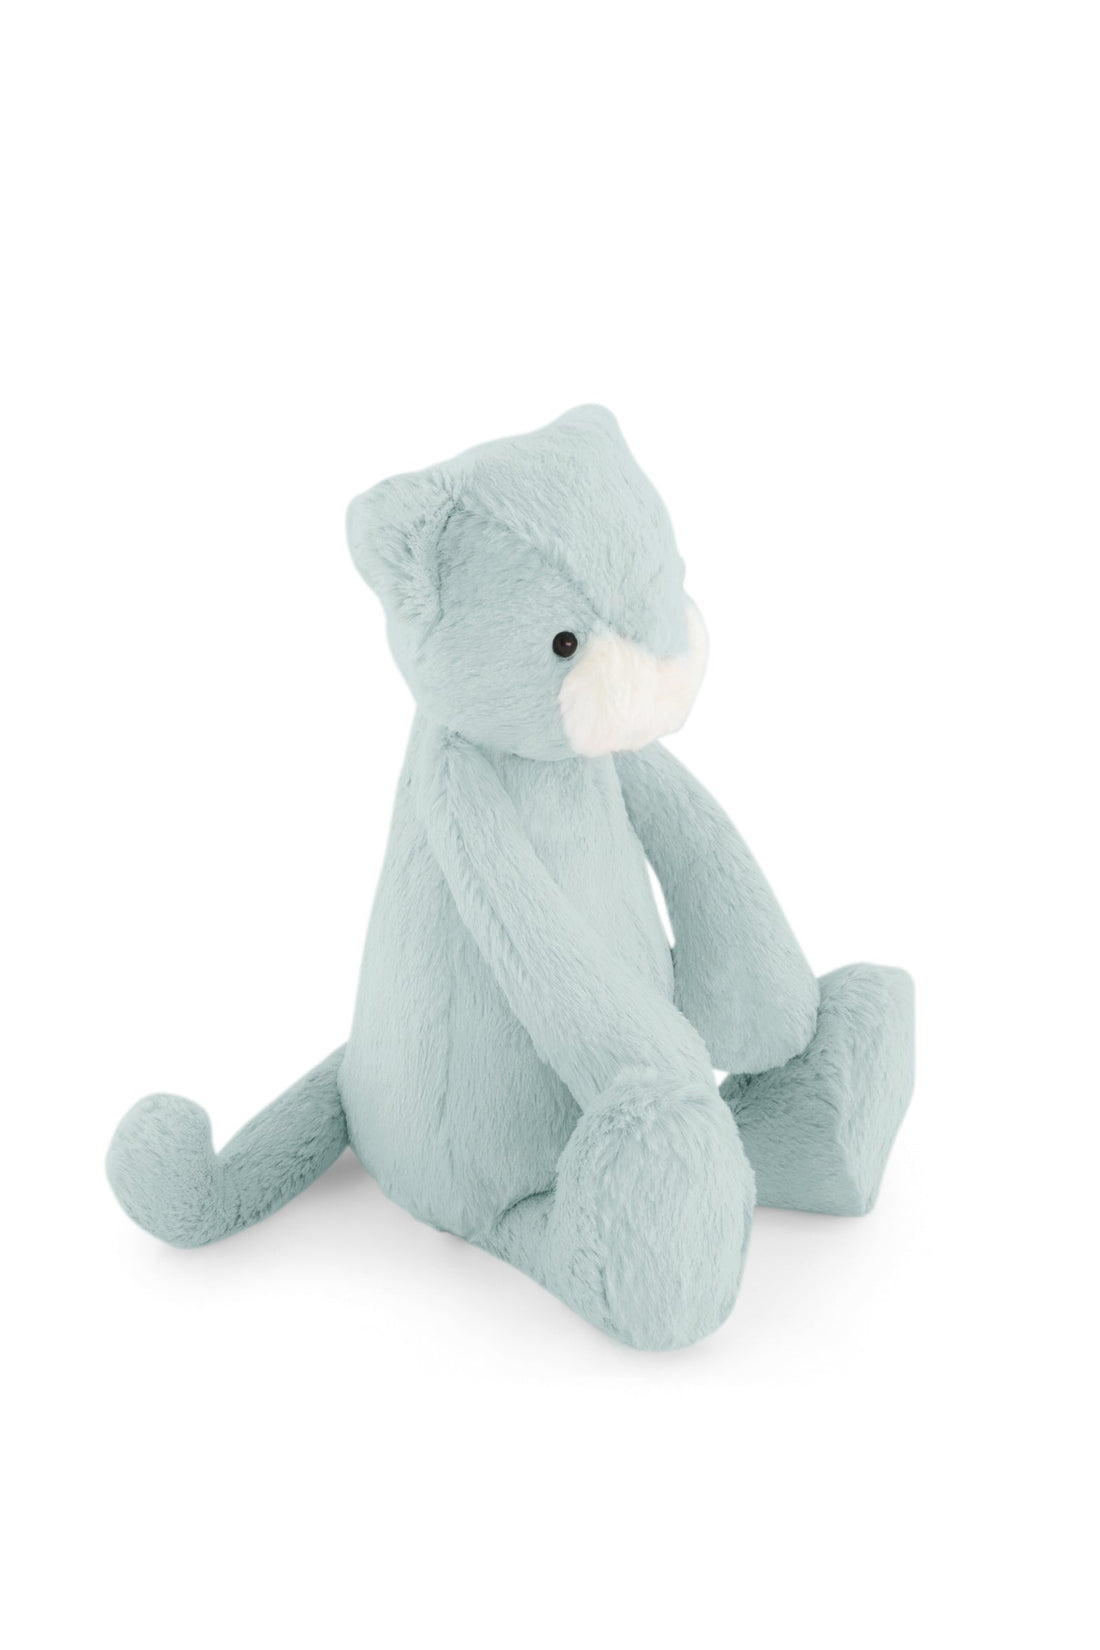 Snuggle Bunnies - Elsie the Kitty - Sprout Childrens Toy from Jamie Kay NZ